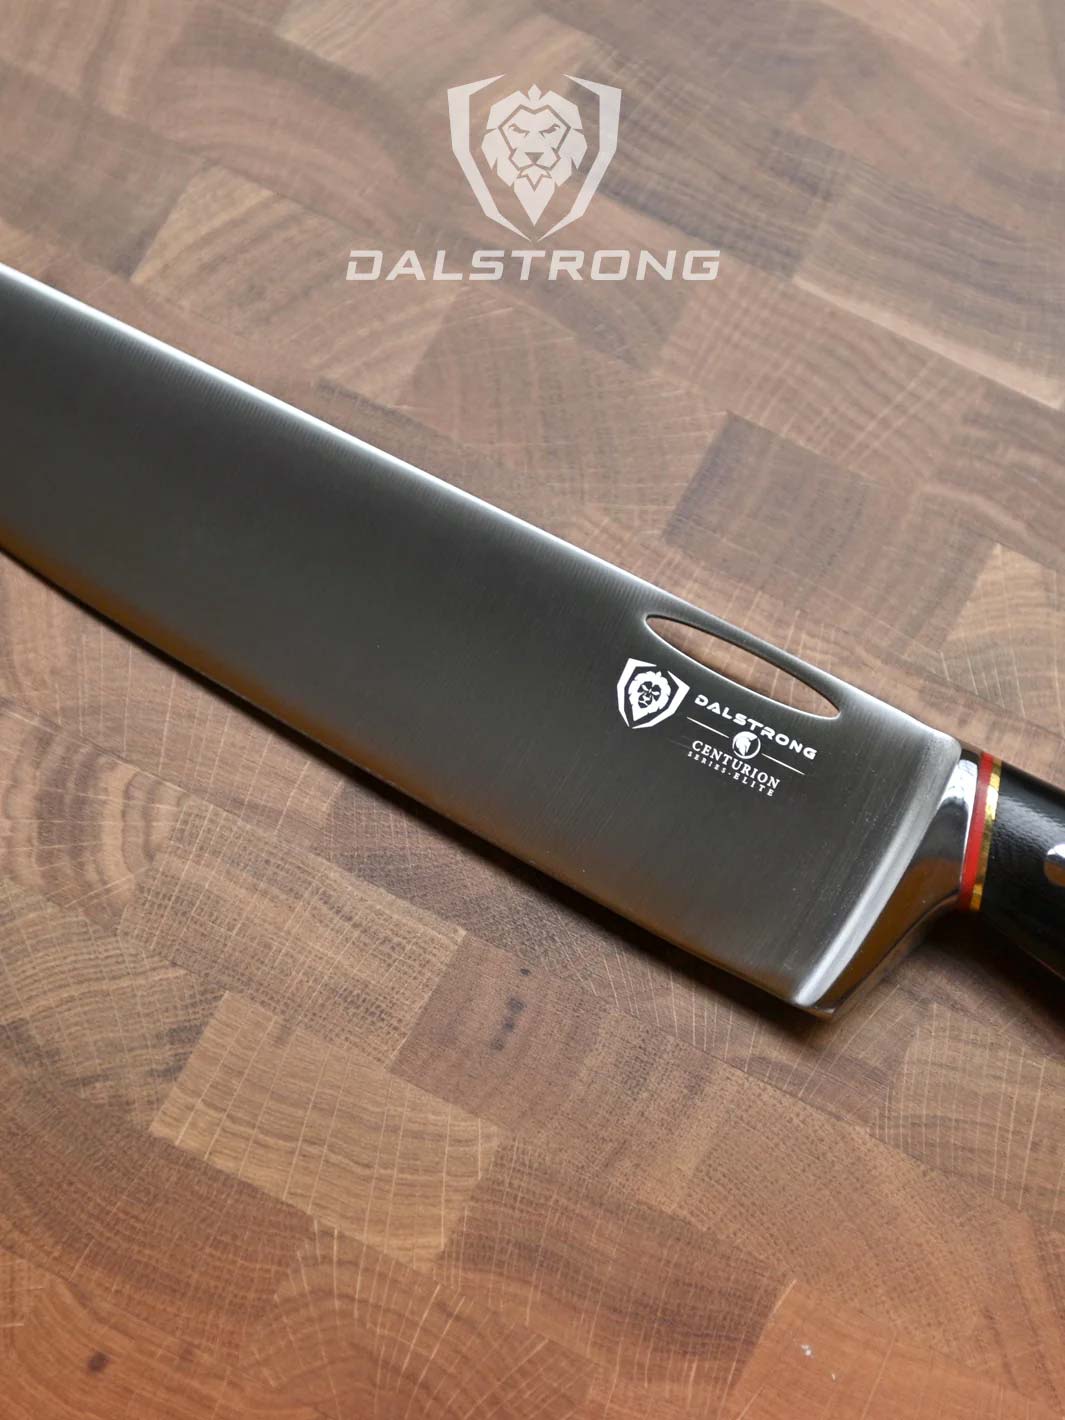 Dalstrong centurion series 10 inch chef knife with black handle showcasing it's blade.